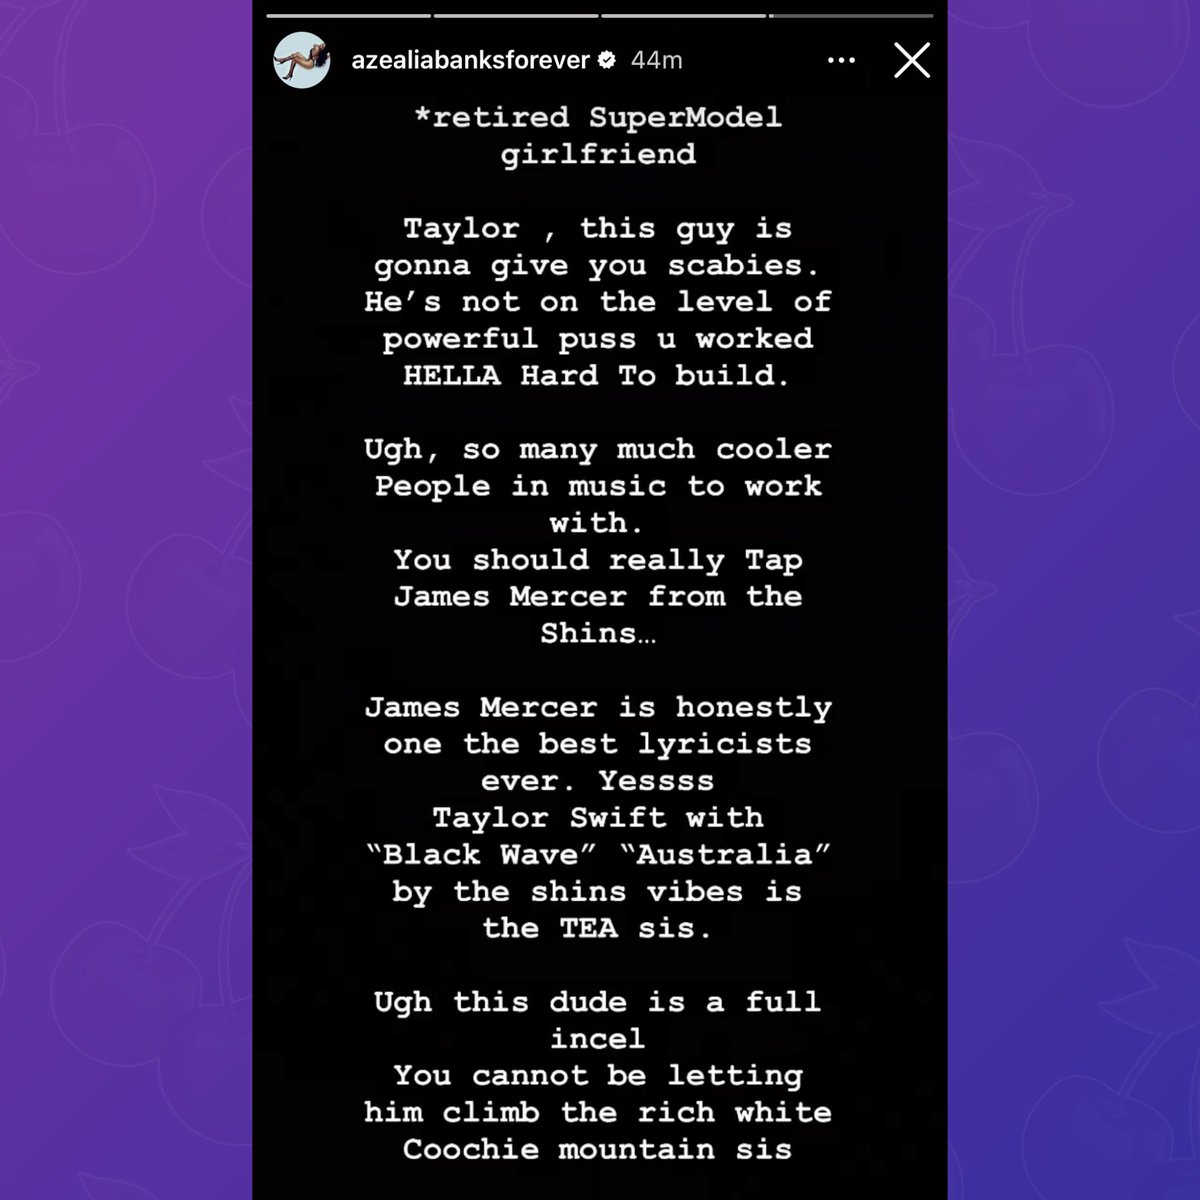 Azealia Banks comments on Taylor Swift and Matty Healy’s rumored relationship:

“Taylor, this guy is gonna give you scabies. He’s not on the level of powerful puss u worked HELLA hard to build.”